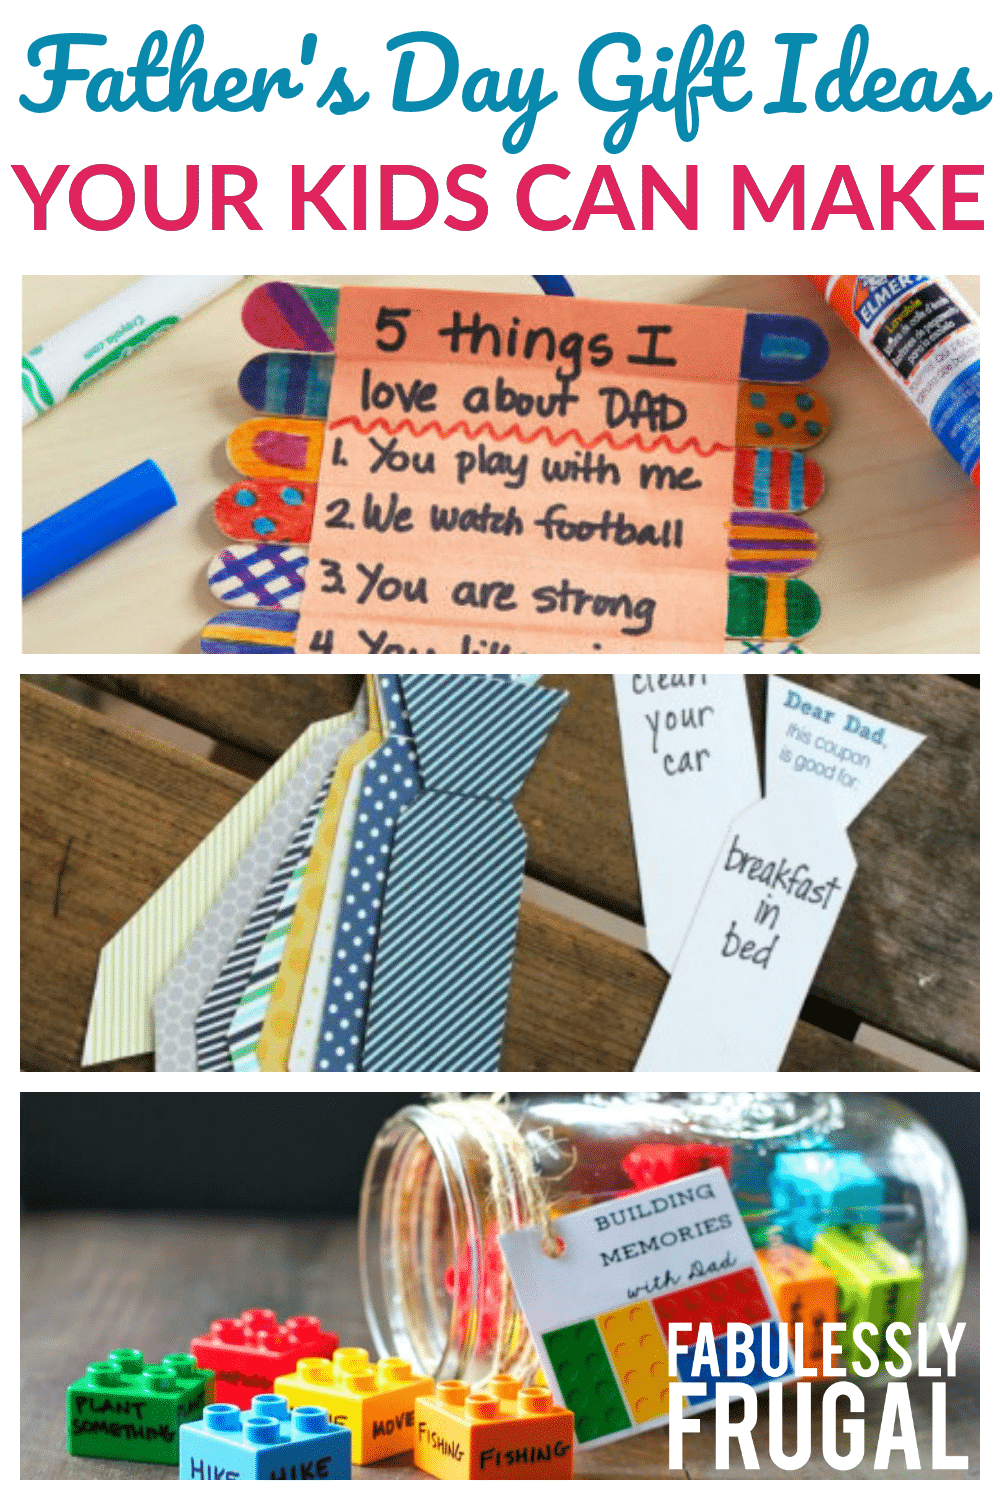 Father's Day gift ideas your kids can make